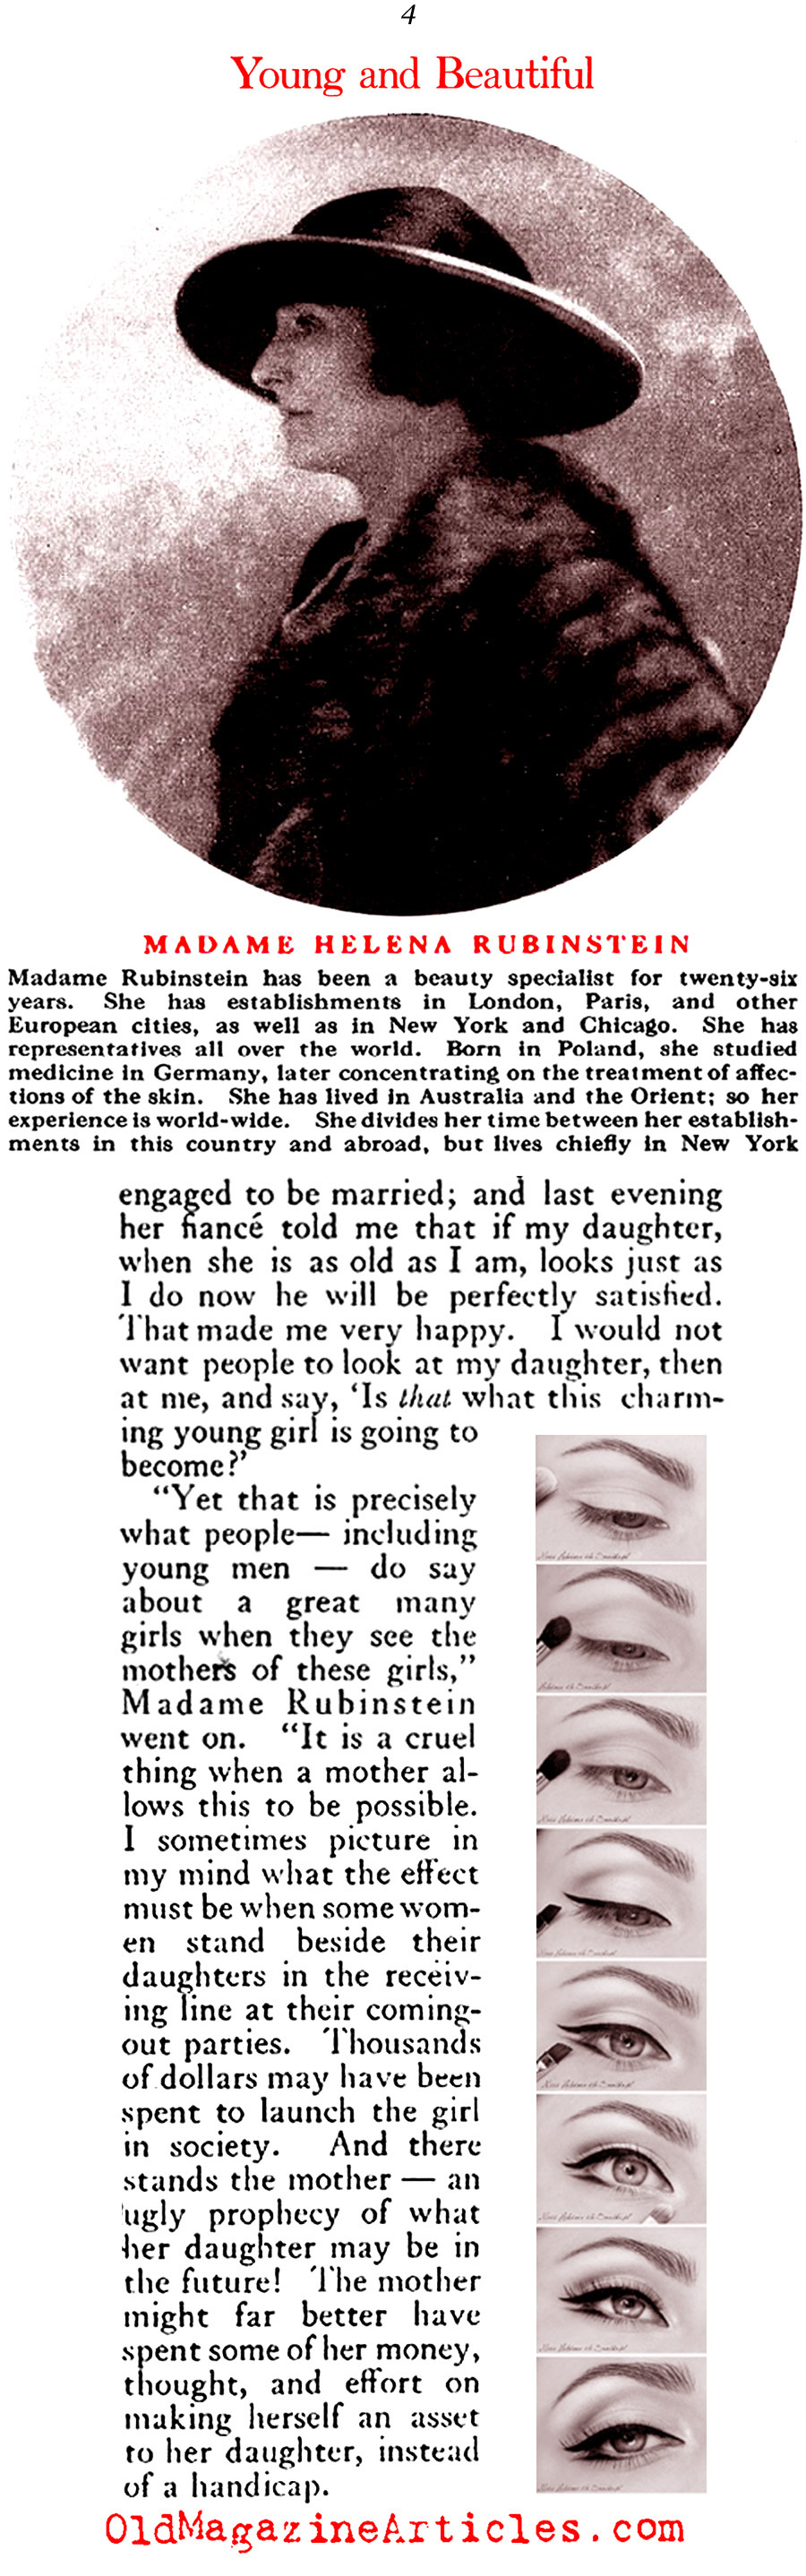 Helena Rubenstein on Youth, Beauty and Commerce (The American Magazine, 1922)